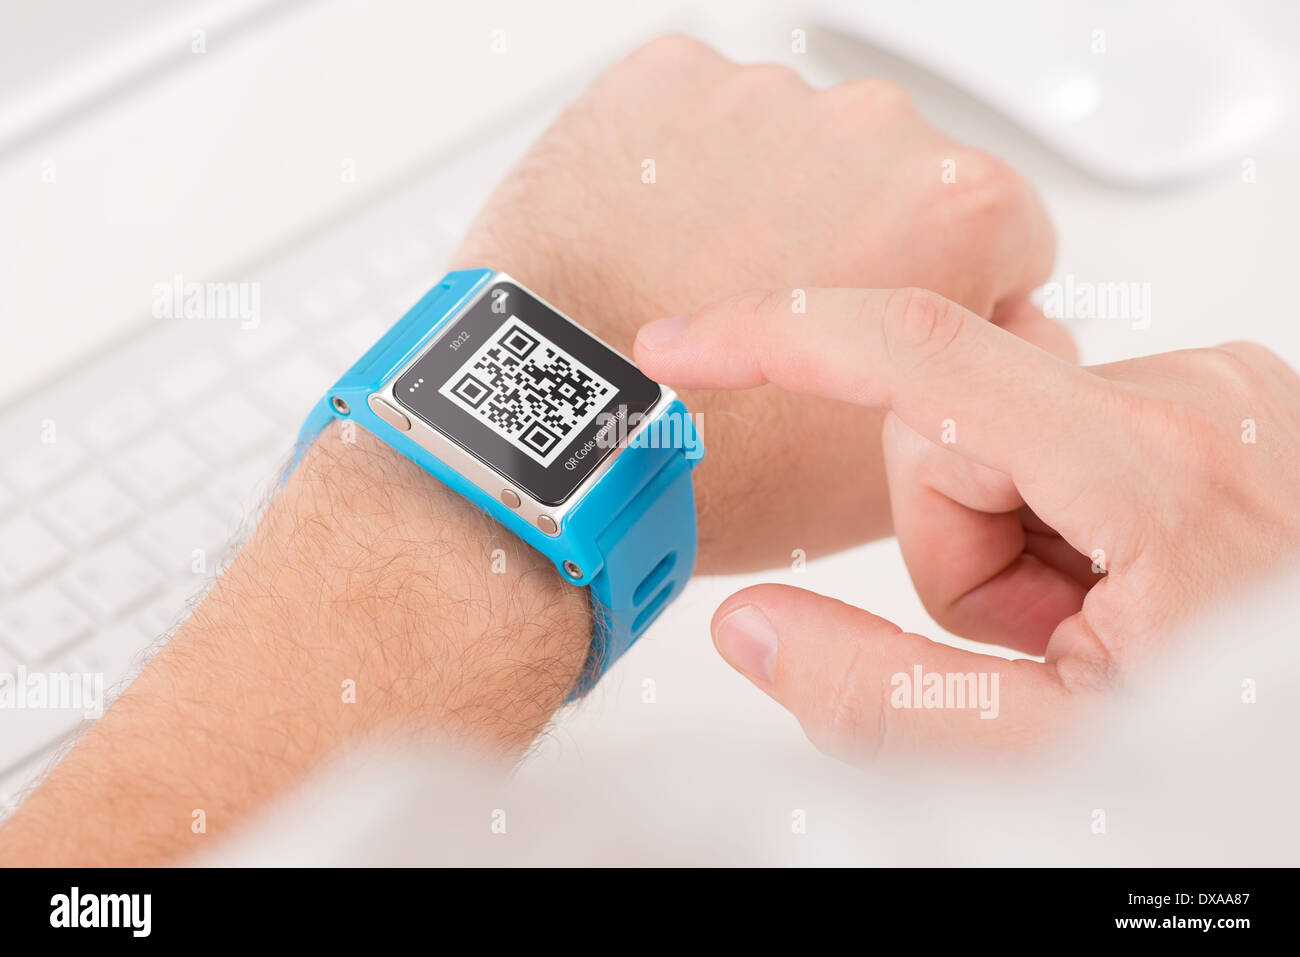 Man is scanning quick response code with blue smart watch Stock Photo